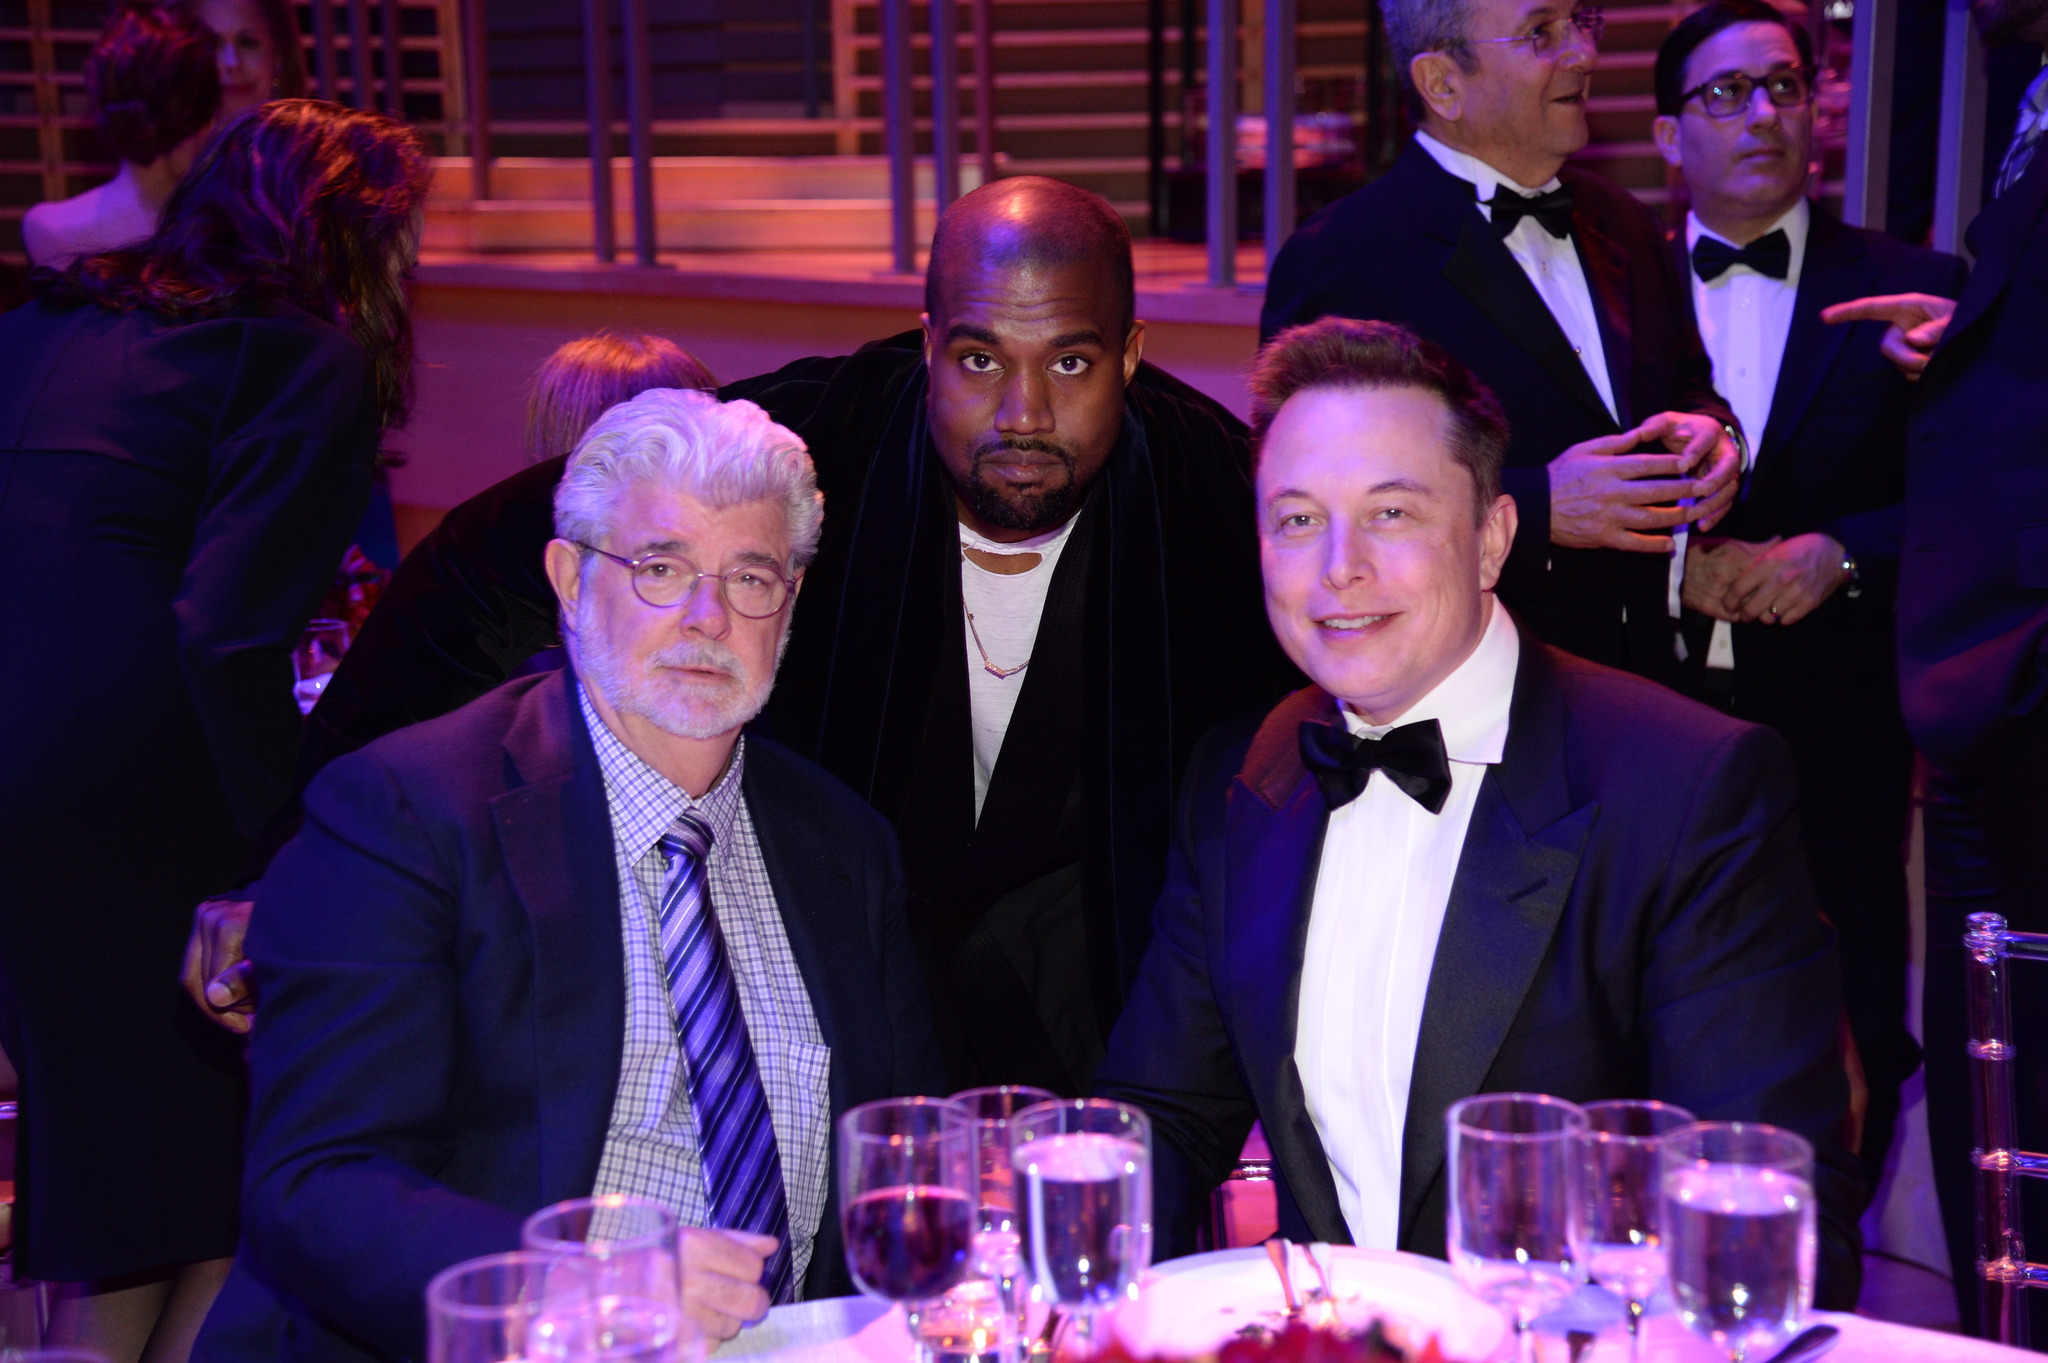 George Lucas, Kanye West and Elon Musk